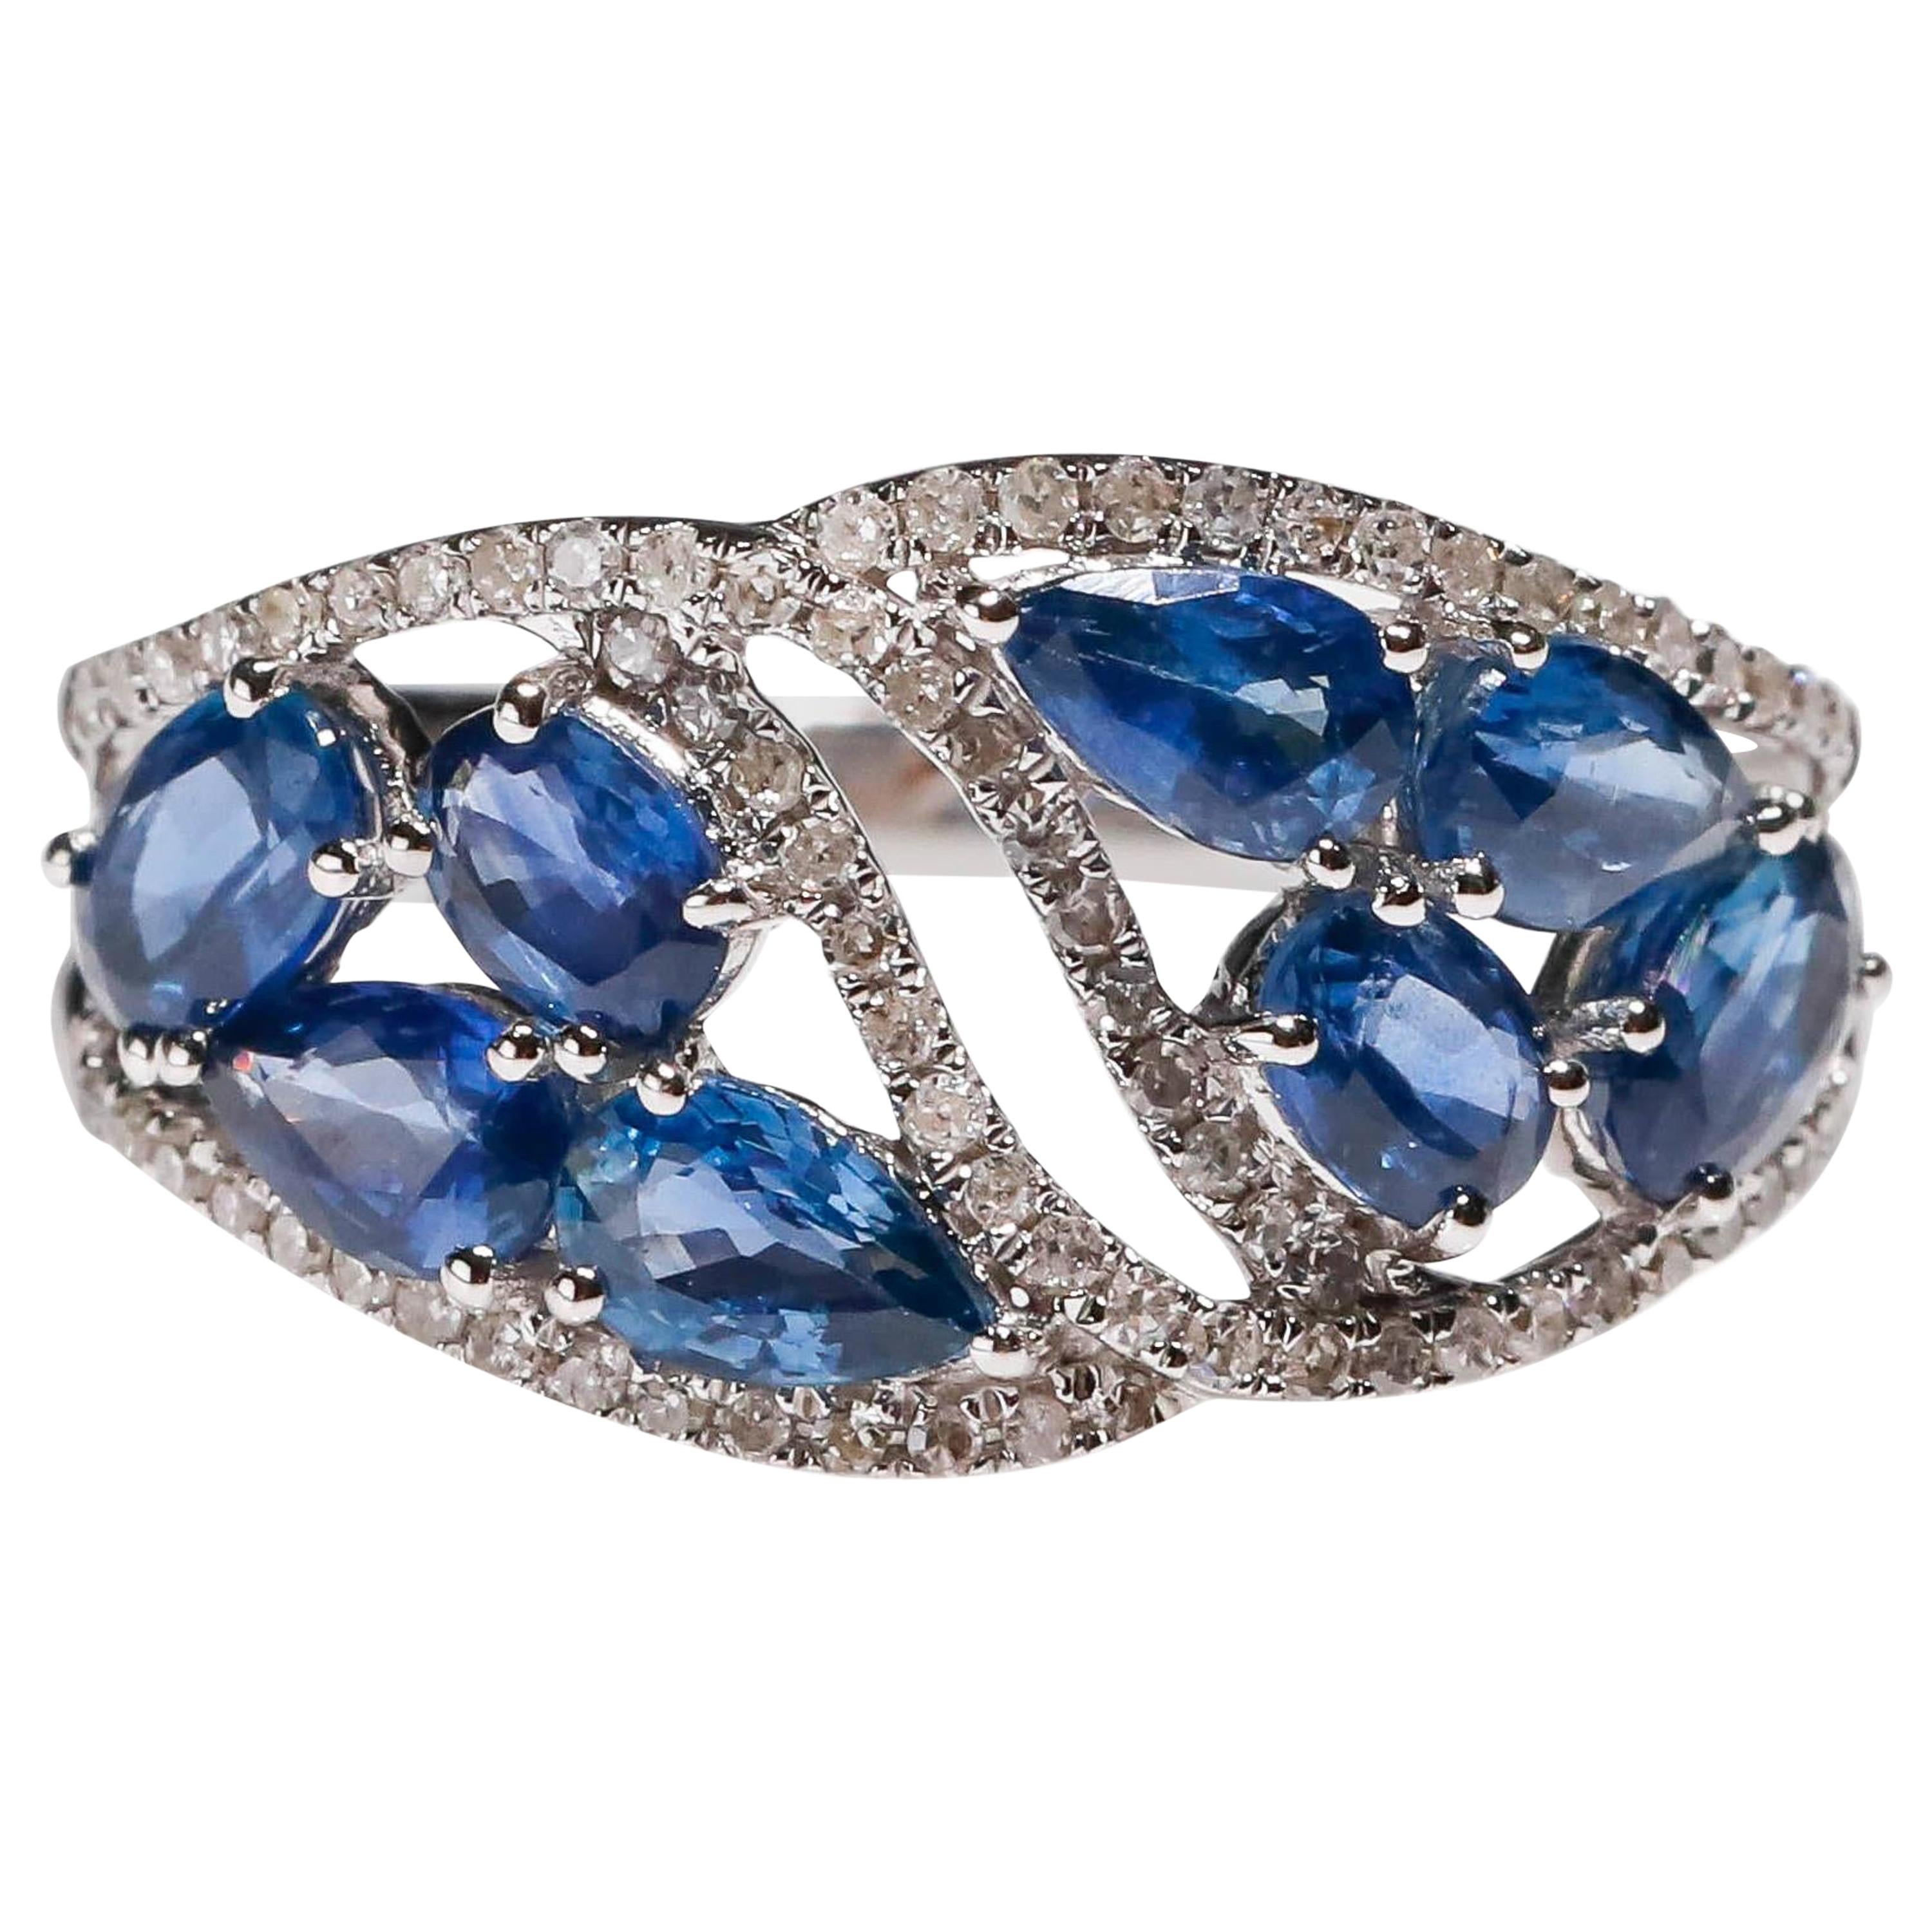 14 Karat White Gold 2.24 Carat Oval Blue Sapphire 0.22 Carat Diamond Band Ring

Crafted in 14kt White Gold, this Unique design showcases a Blue Sapphire Bridal designs, set in a halo of round-cut mesmerizing diamonds, Polished to a brilliant